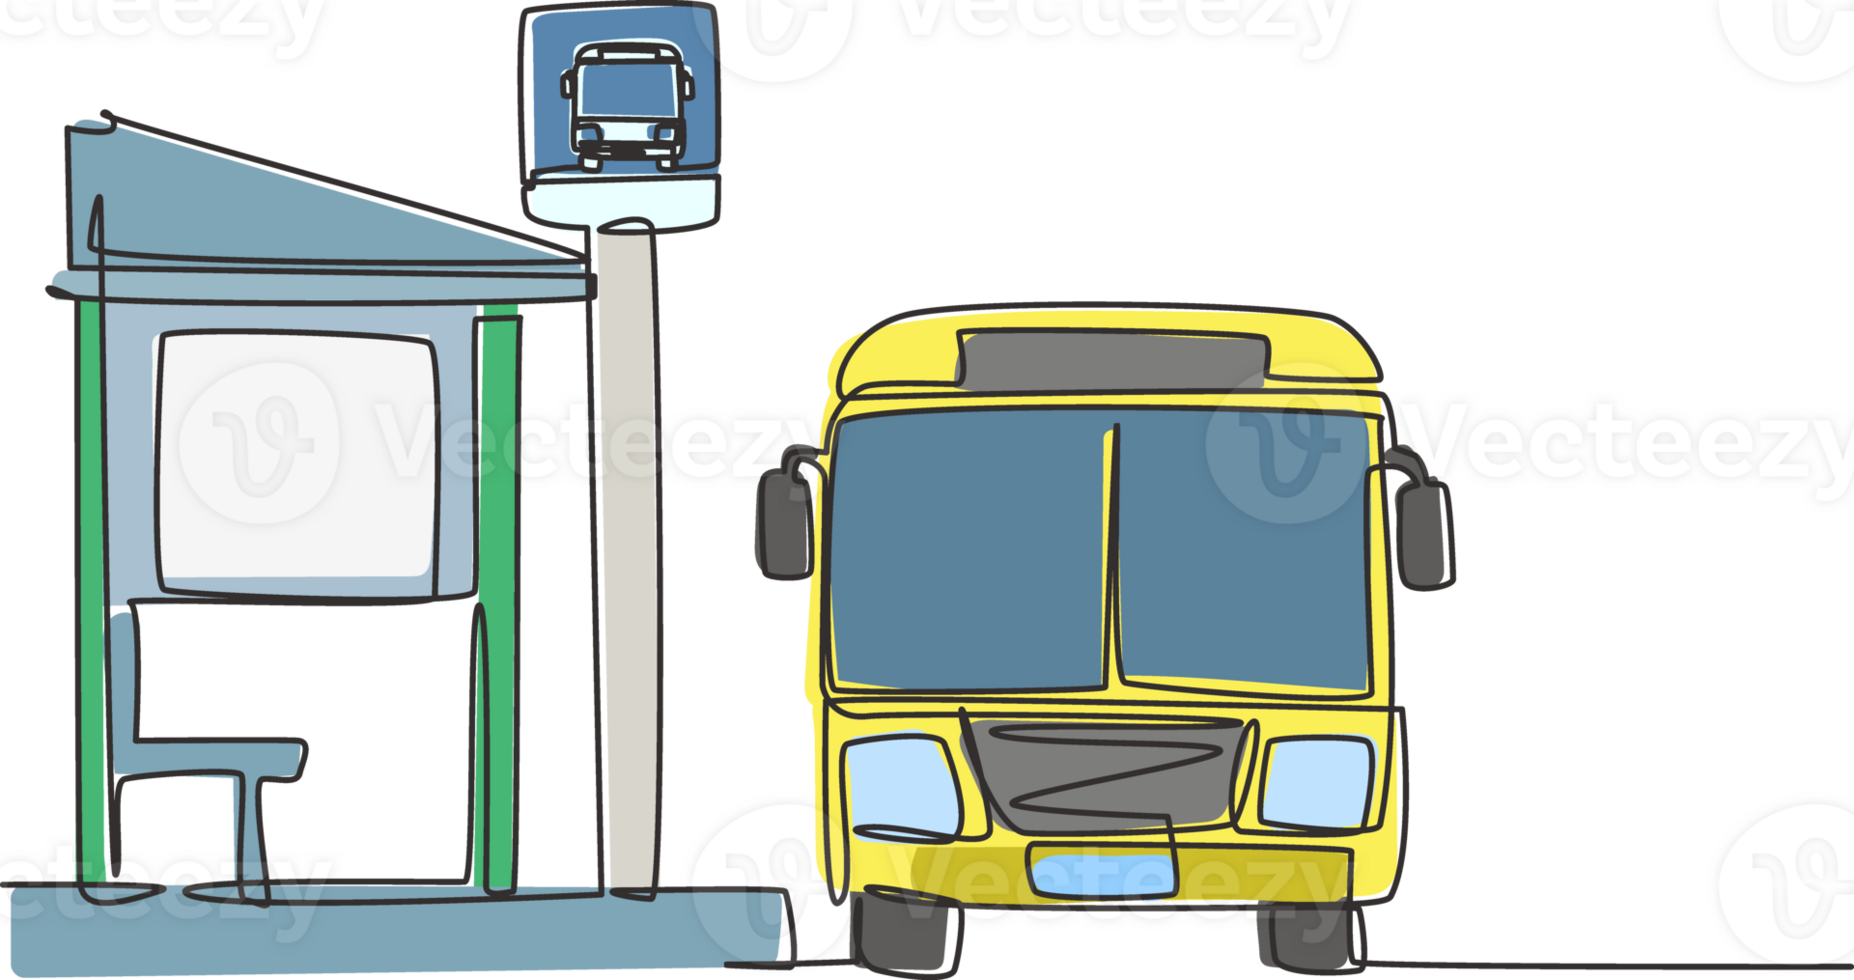 Single one line drawing of bus stop with shelter, simple bus sign and a bus waiting for passengers to get on and off, then continue the journey. Continuous line draw design graphic illustration png